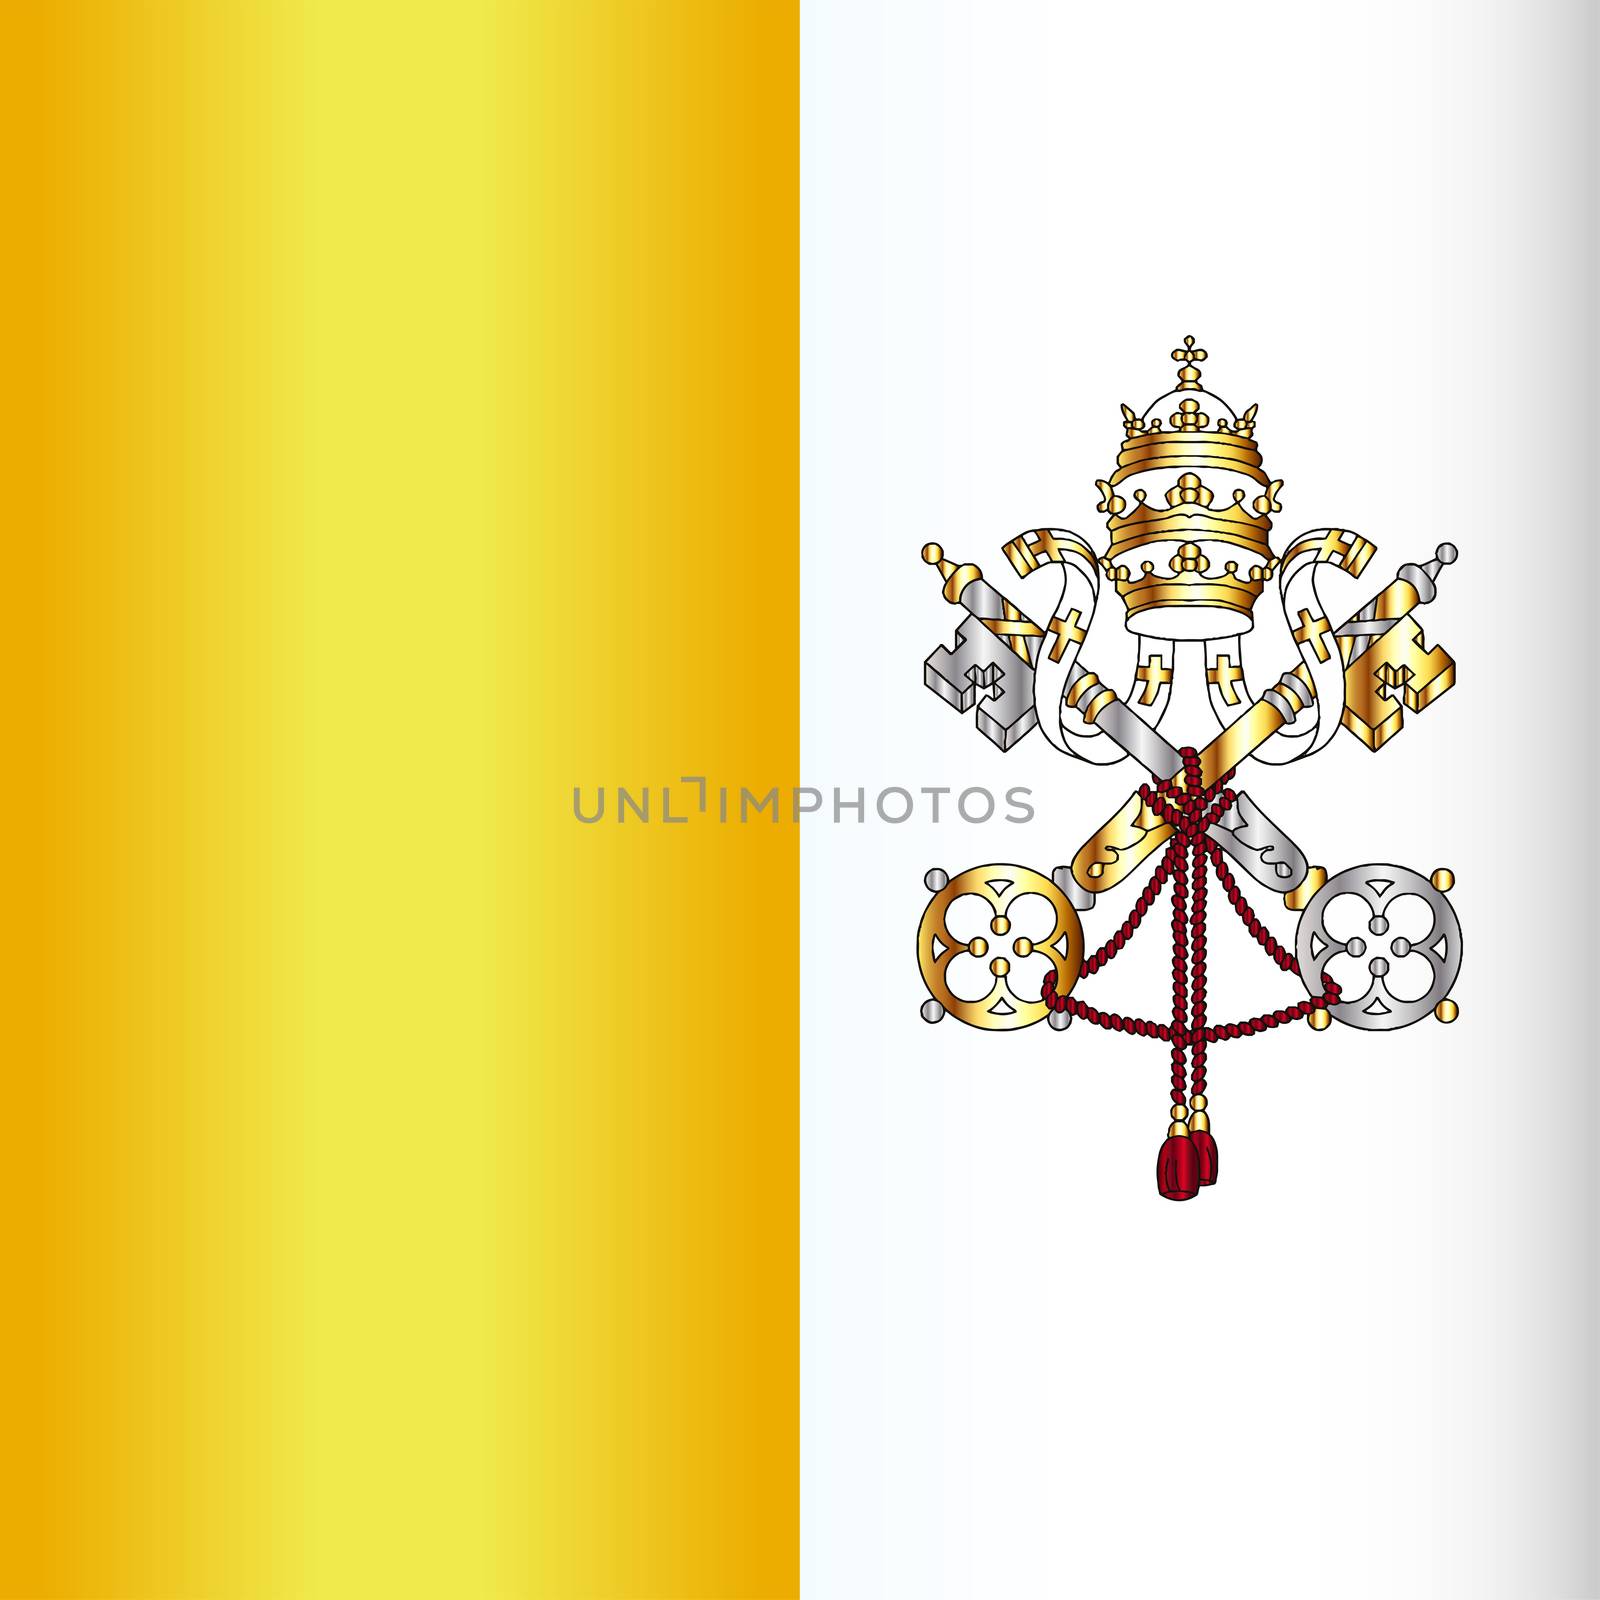 A depiction of the flag of Vatican city